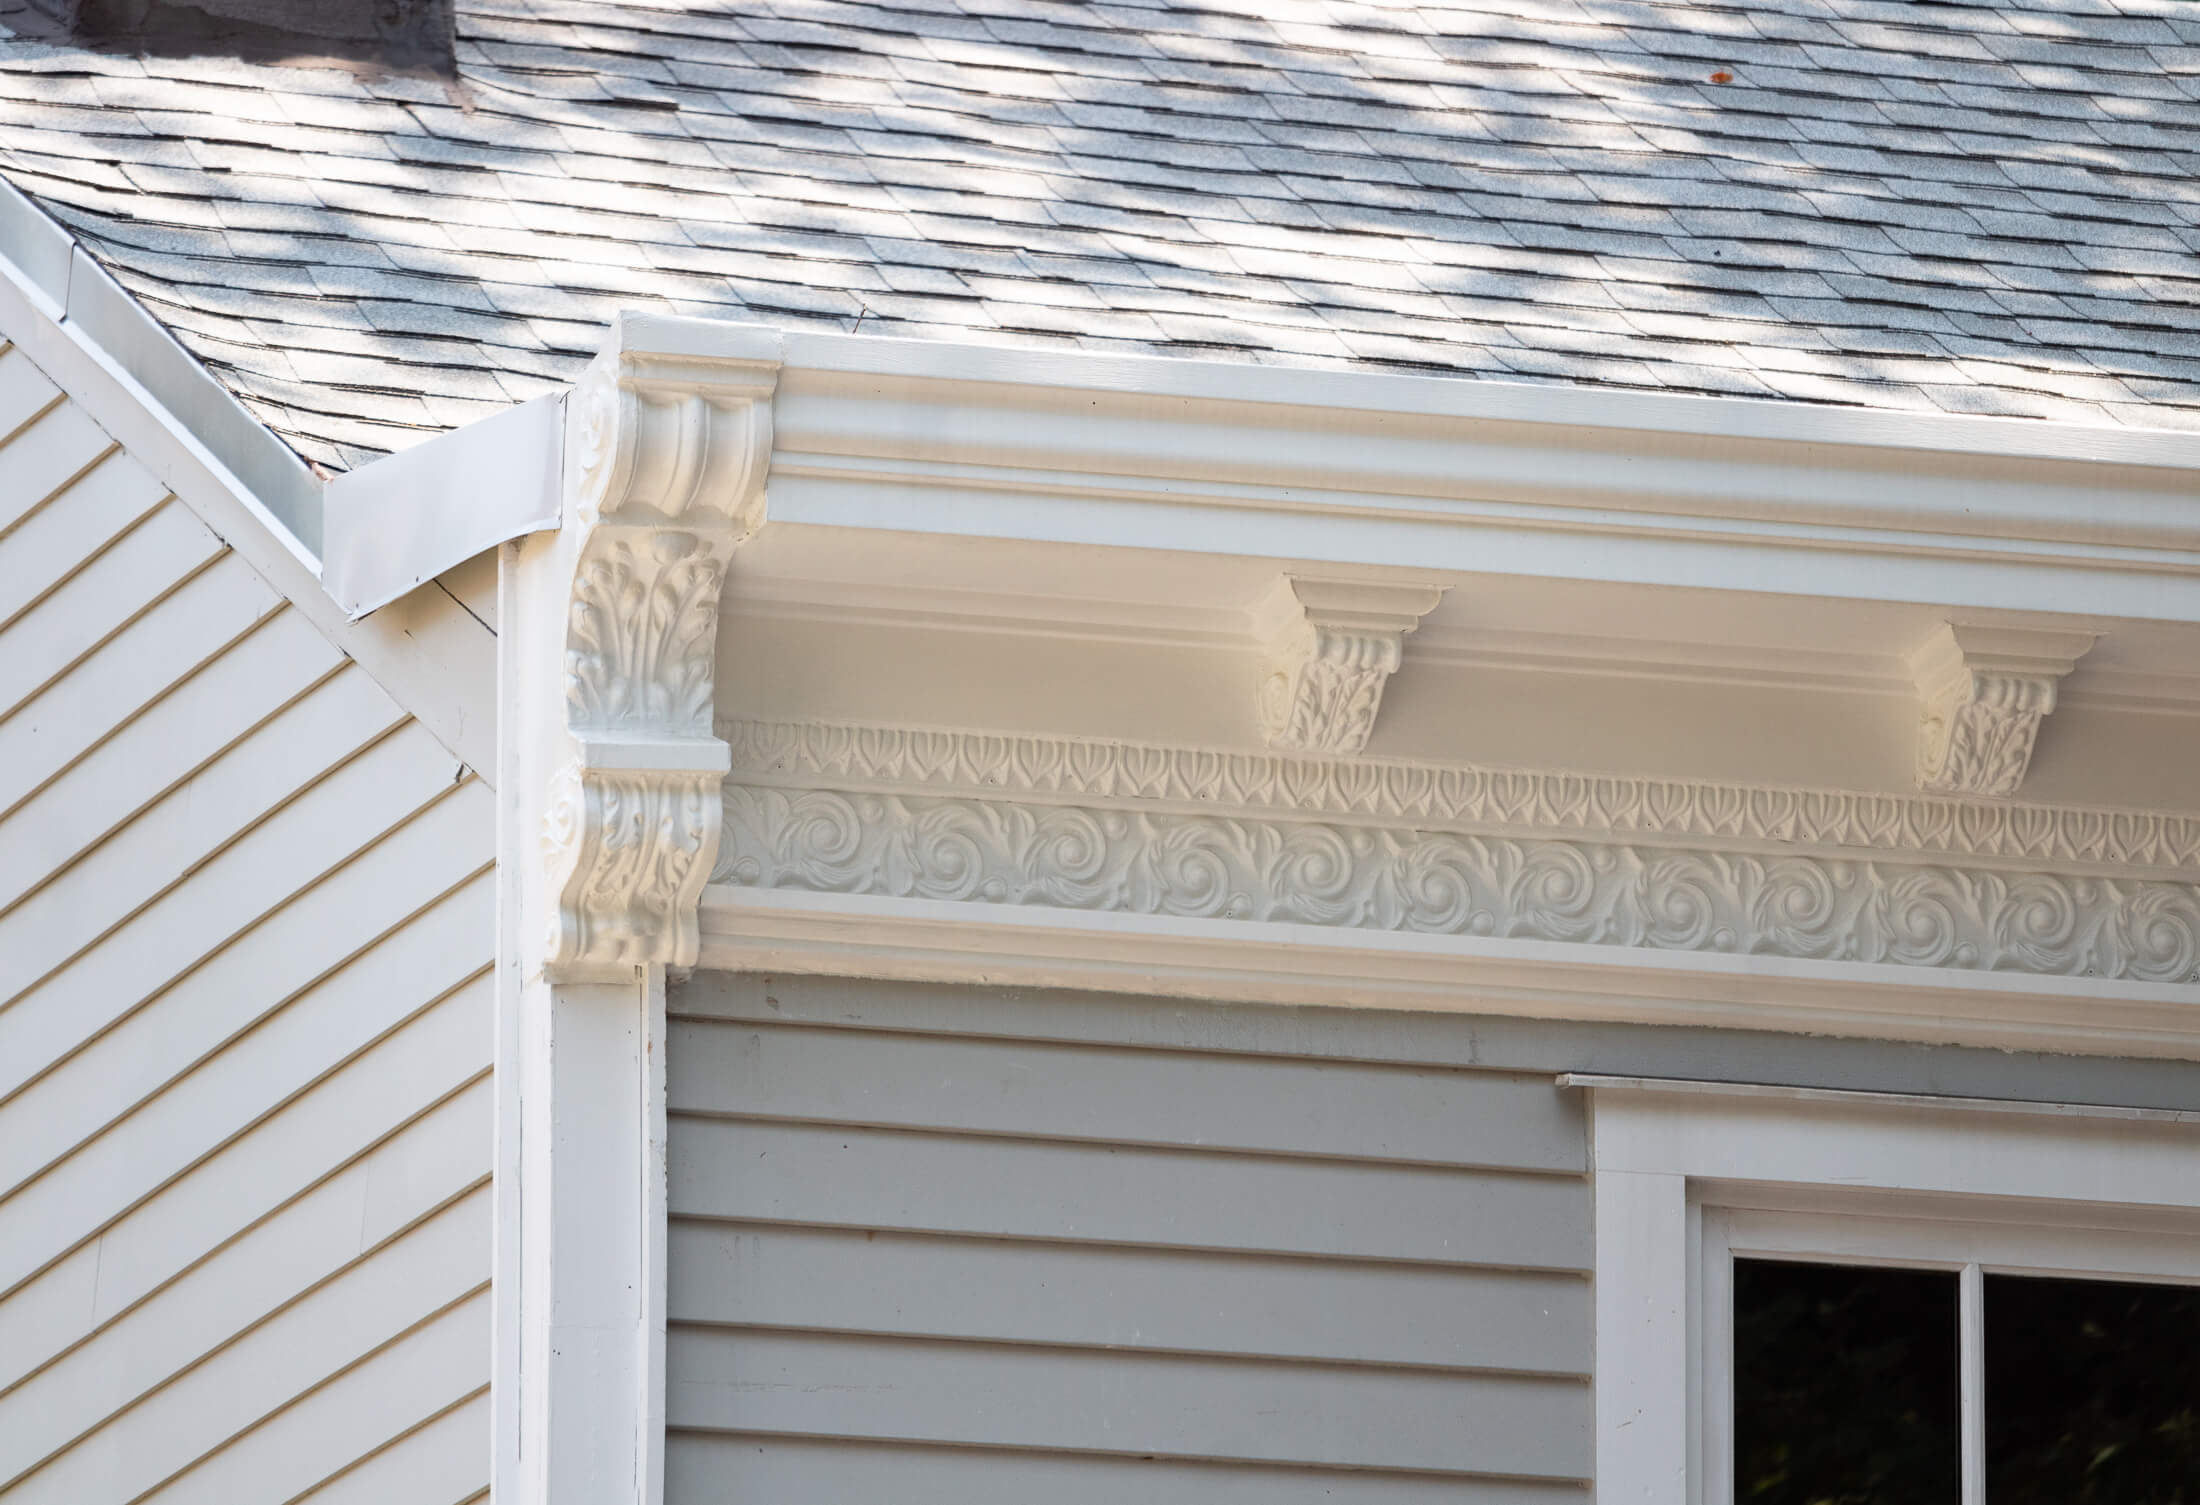 foliate details on the cornice and brackets